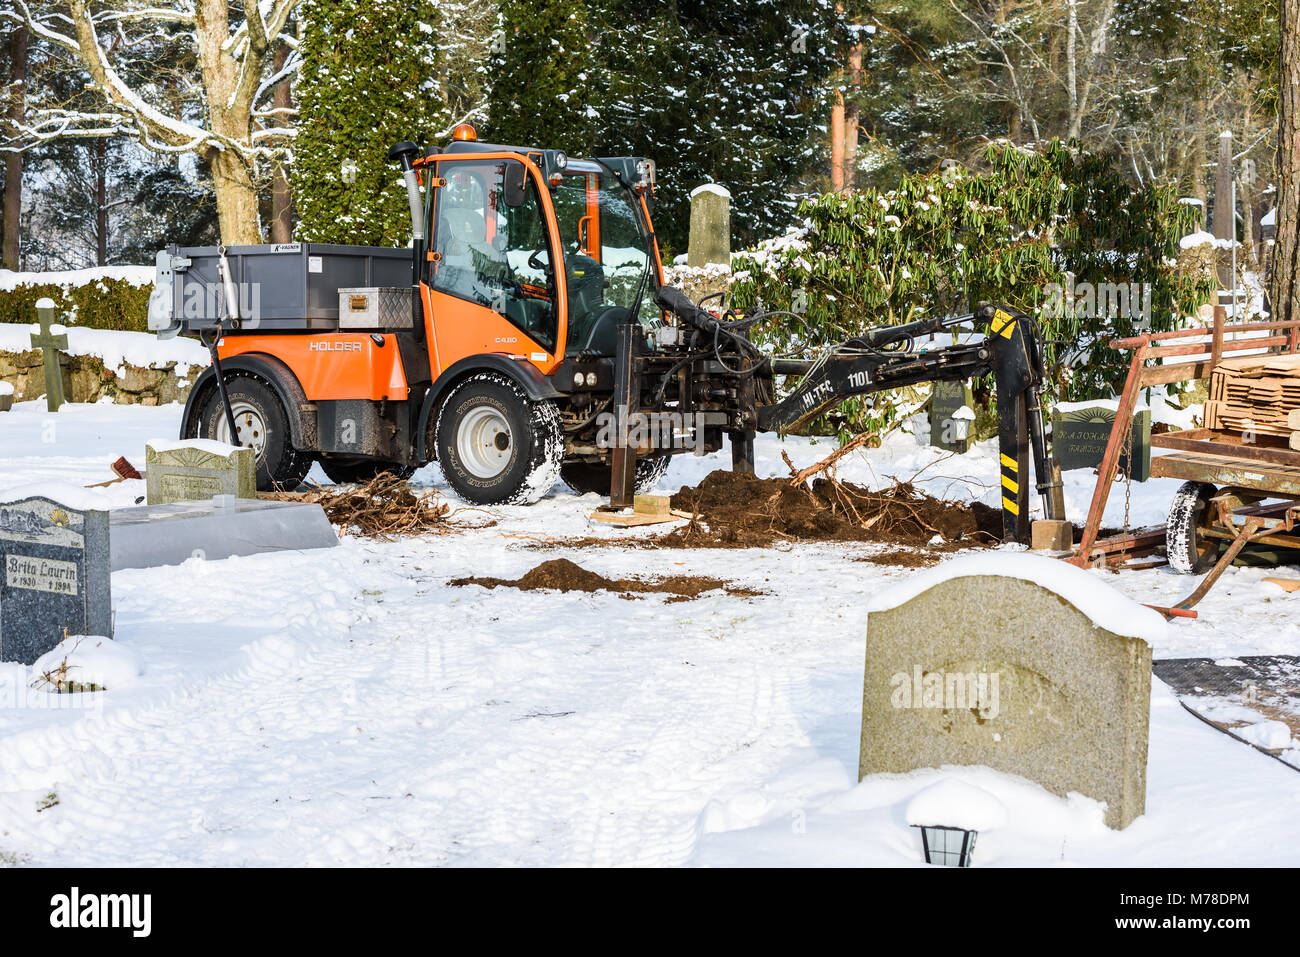 Ronneby, Sweden - March 1, 2018: Documentary of everyday life and environment. Holder C480 tractor used as a grave digger at a cemetery in winter. Roo Stock Photo